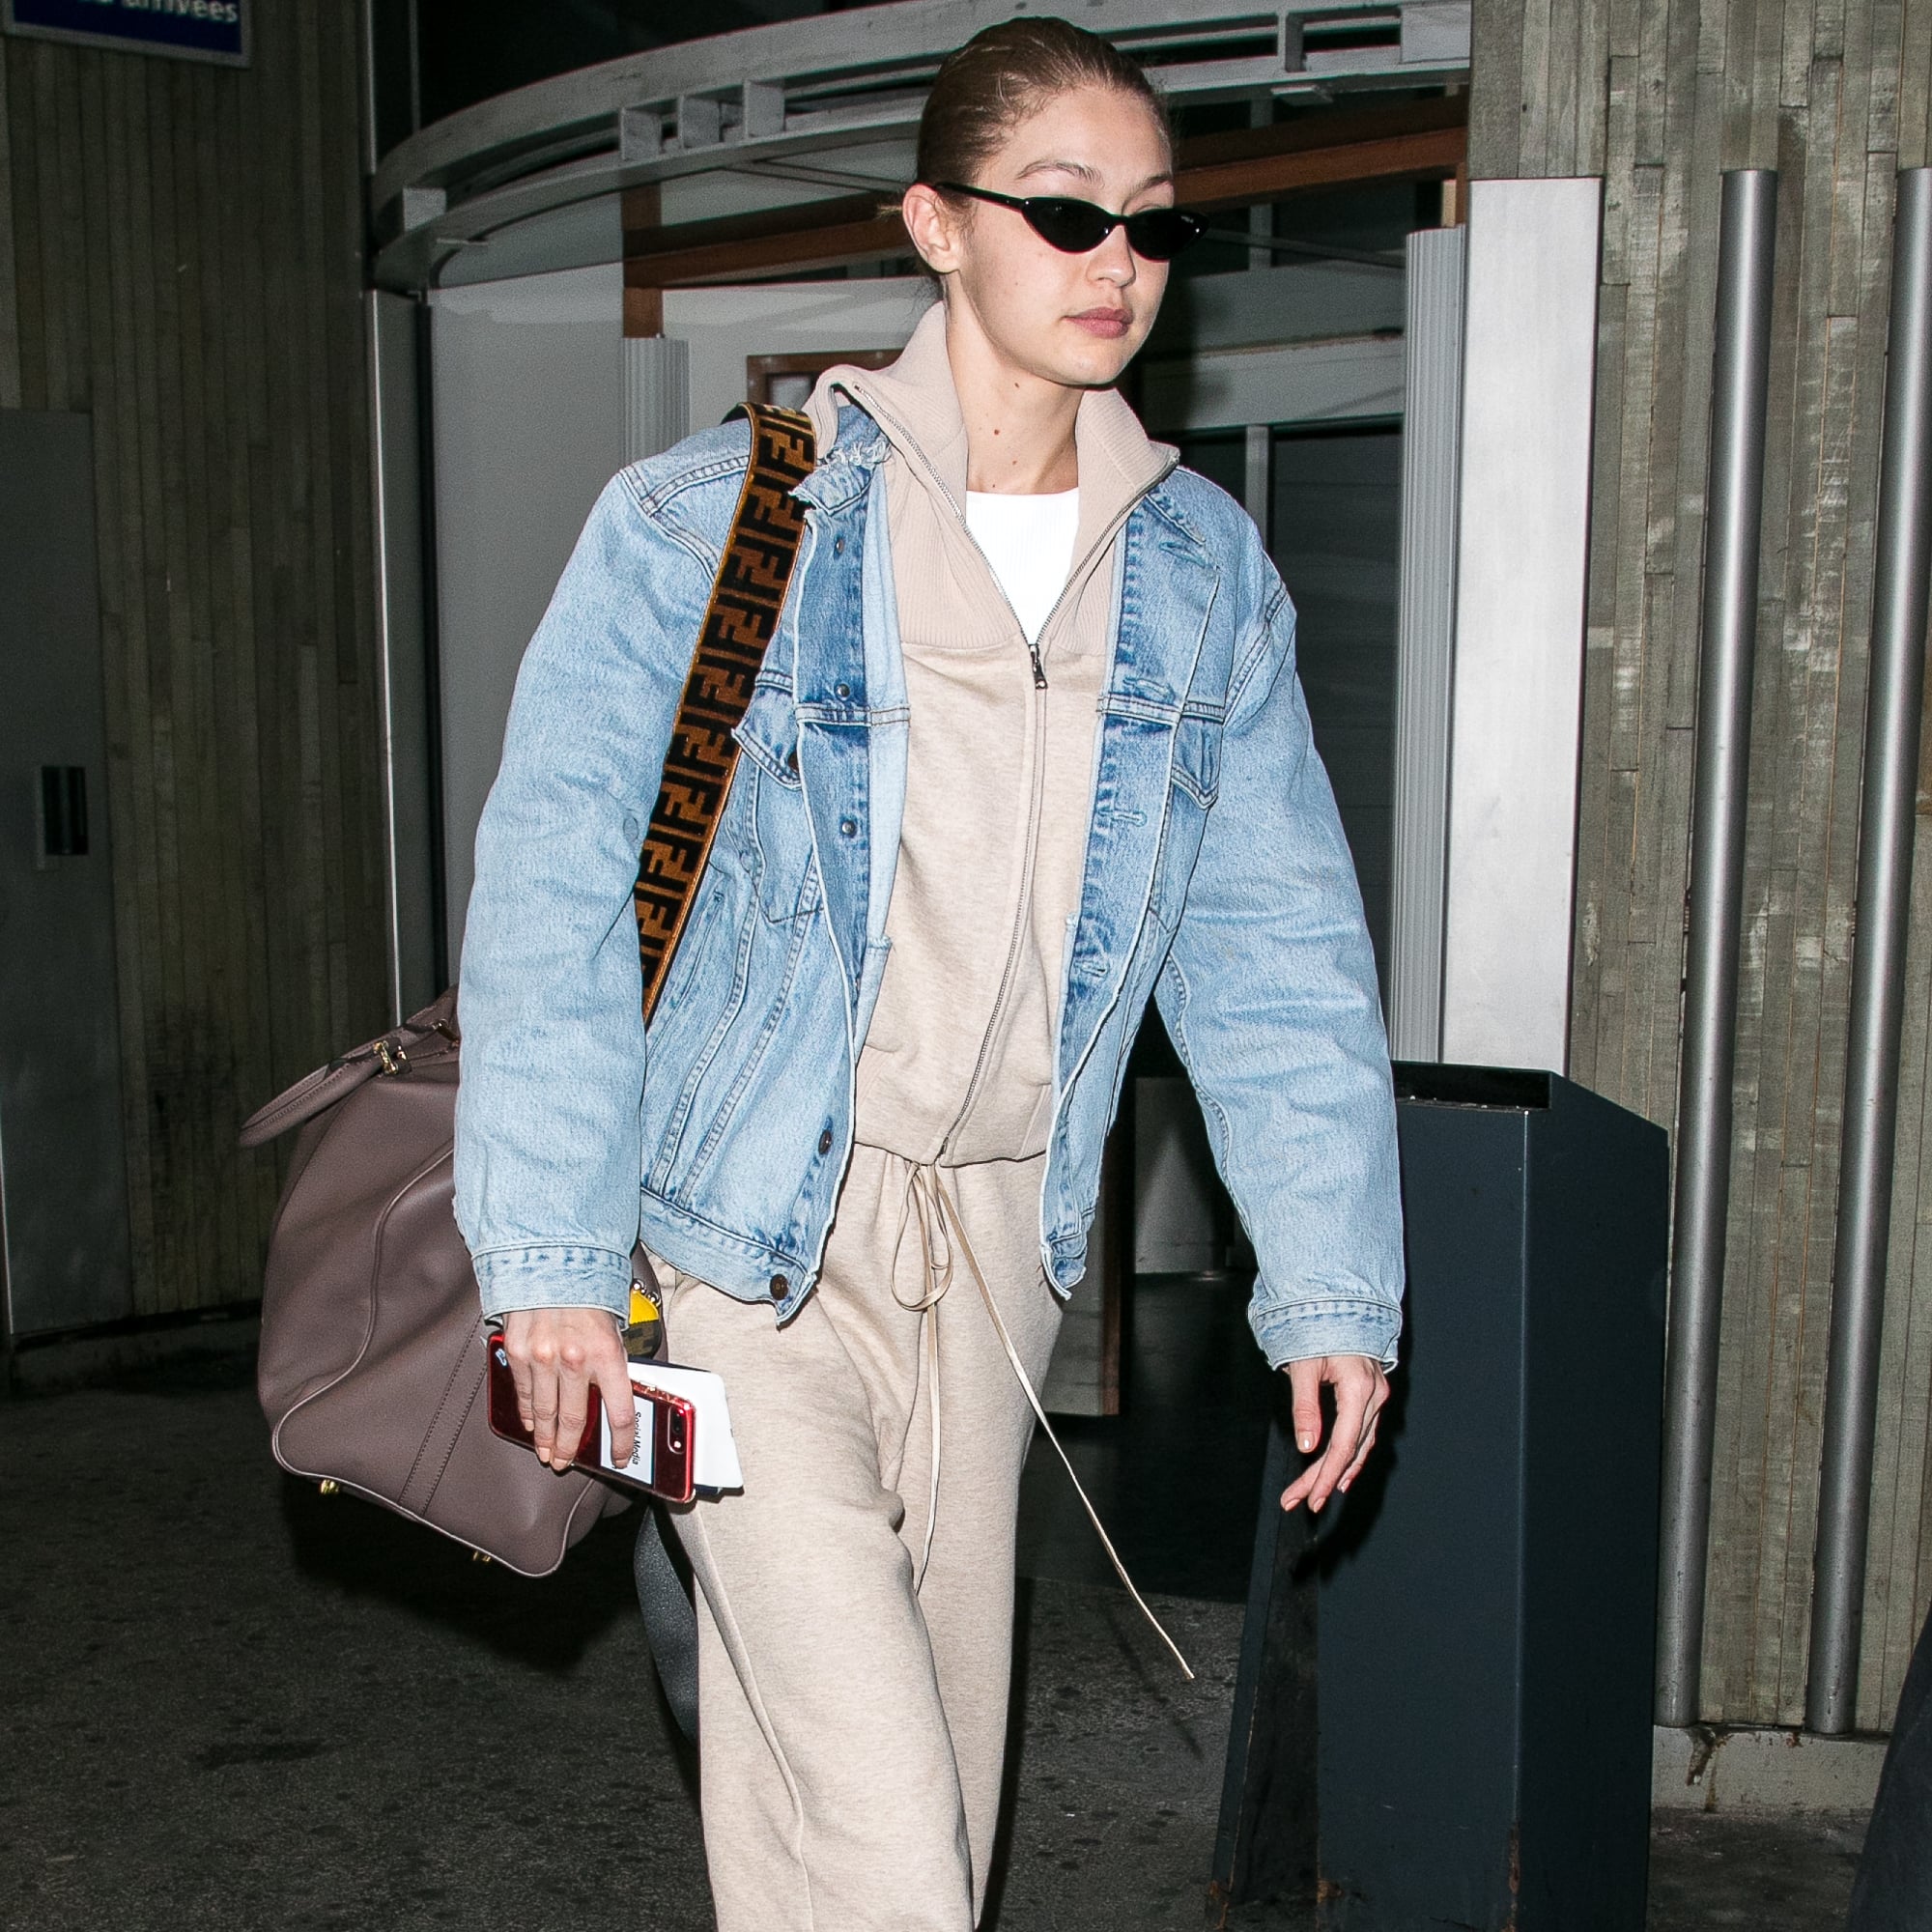 Airport and Travel Outfit Ideas | POPSUGAR Fashion